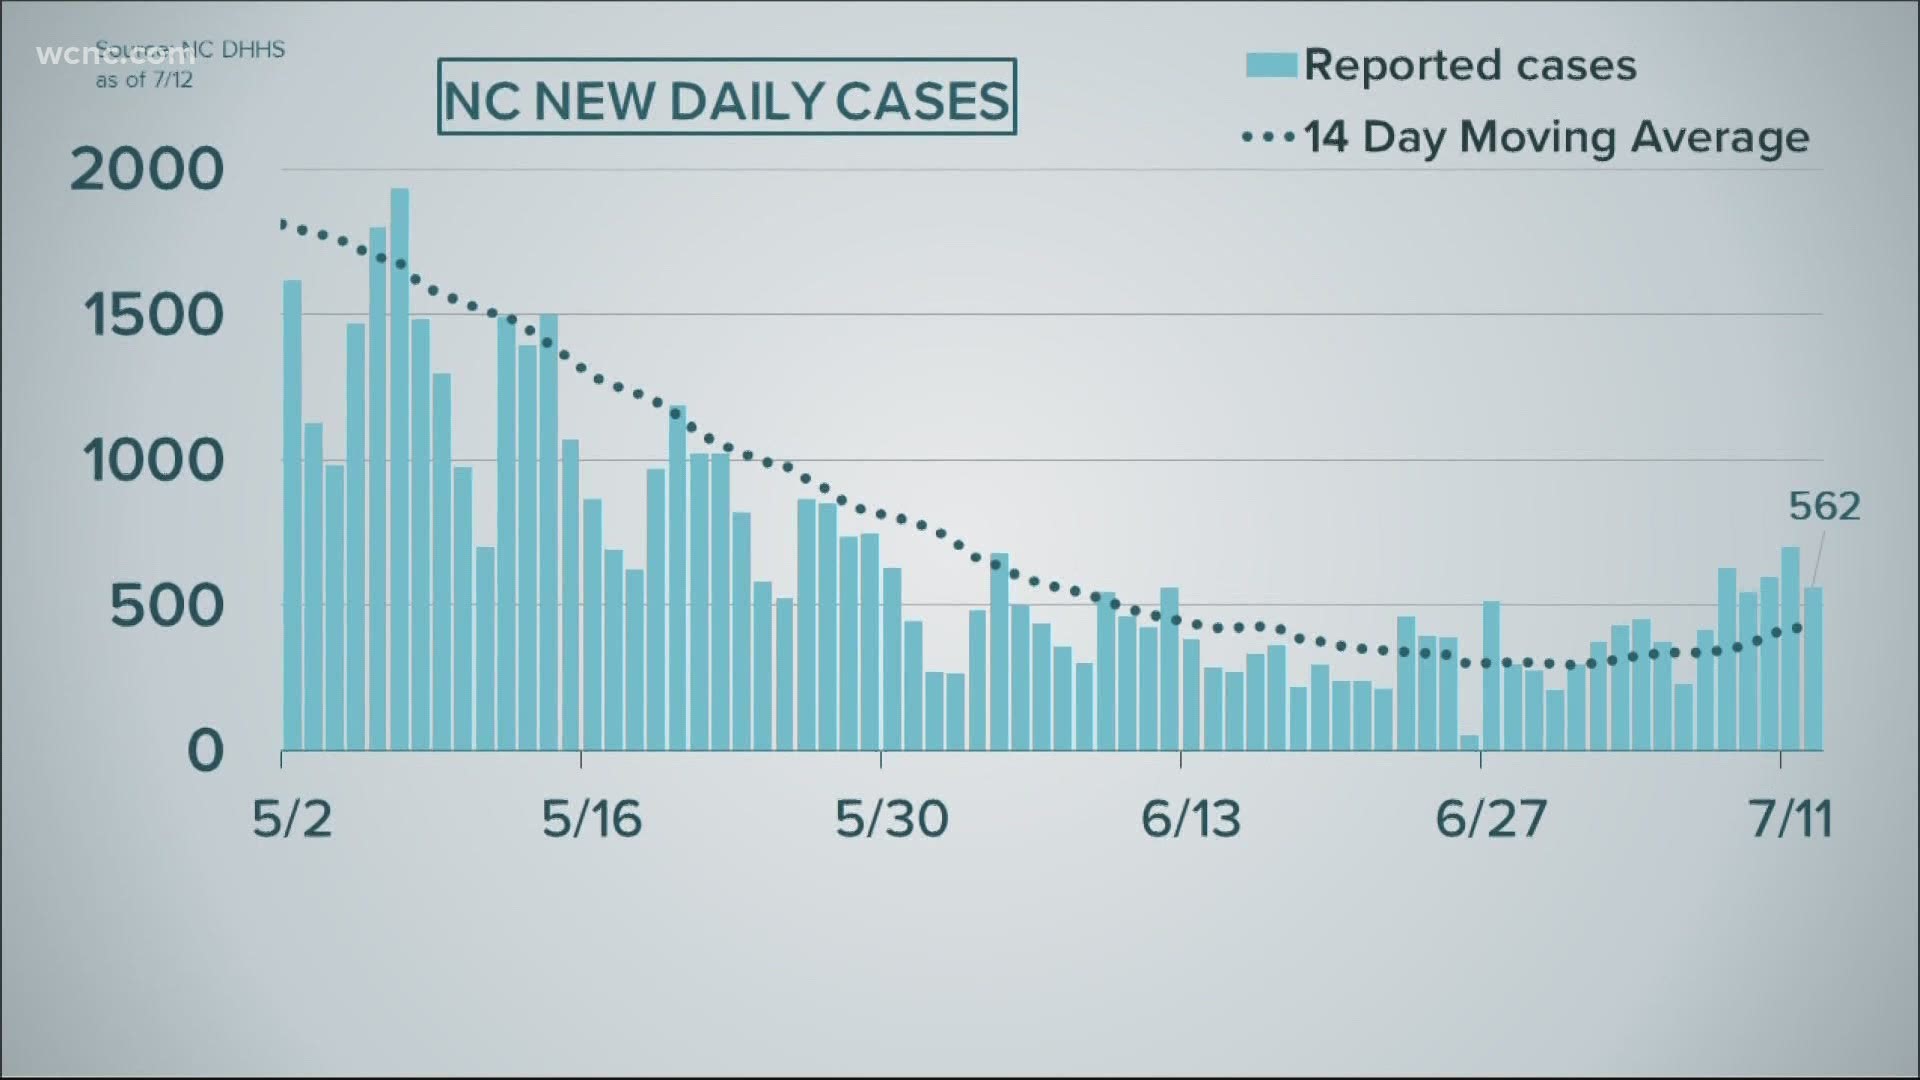 Health officials in the Carolinas said bumps in the metrics have followed every holiday, and with delta cases growing, July 4th would likely be no different.